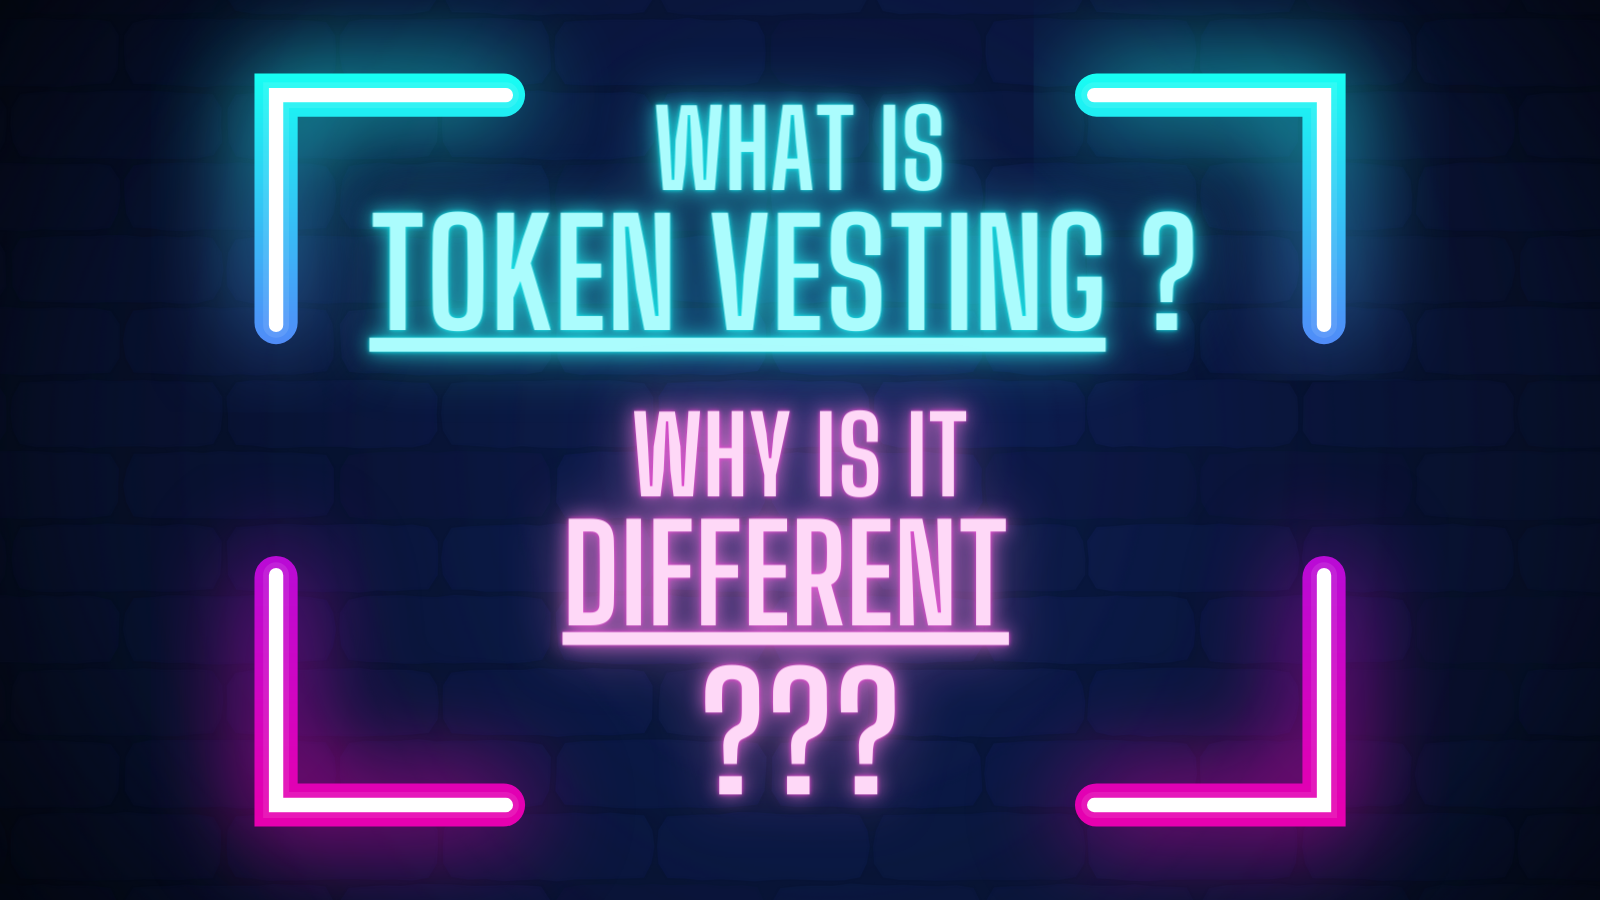 What is token vesting? Why is it different?